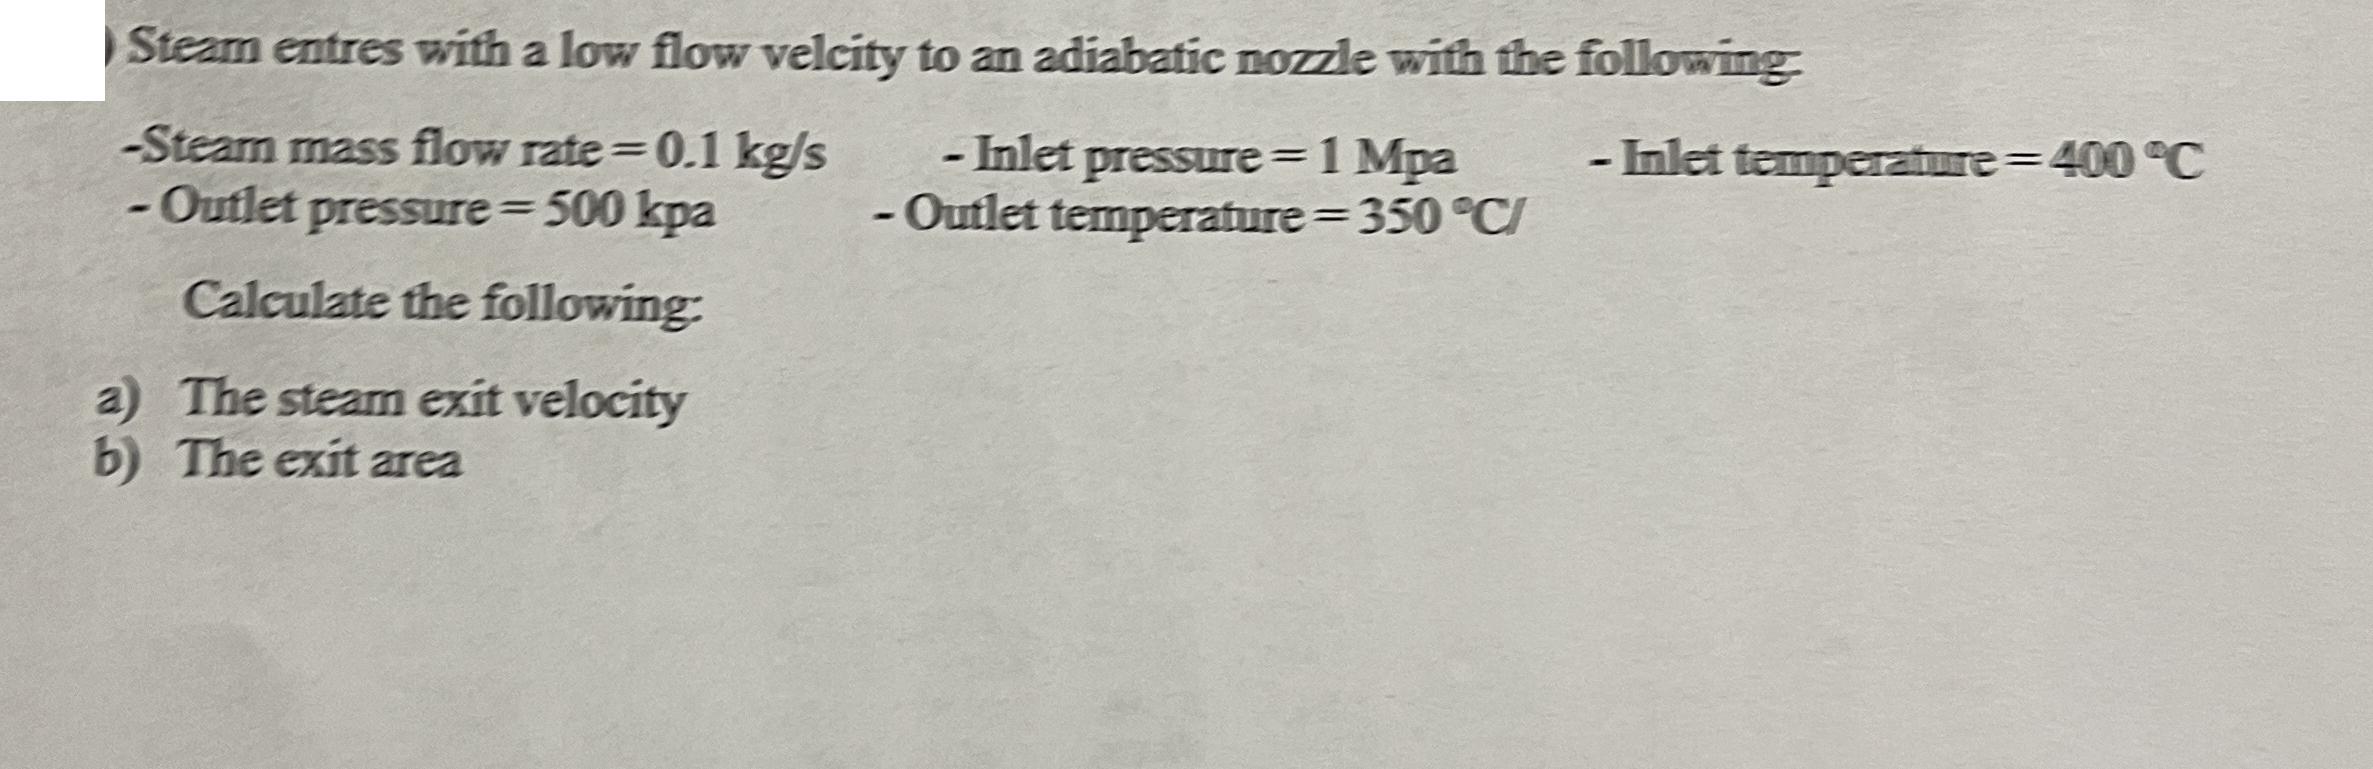 Steam entres with a low flow velcity to an adiabatic nozzle with the following -Inlet pressure = 1 Mpa -Steam